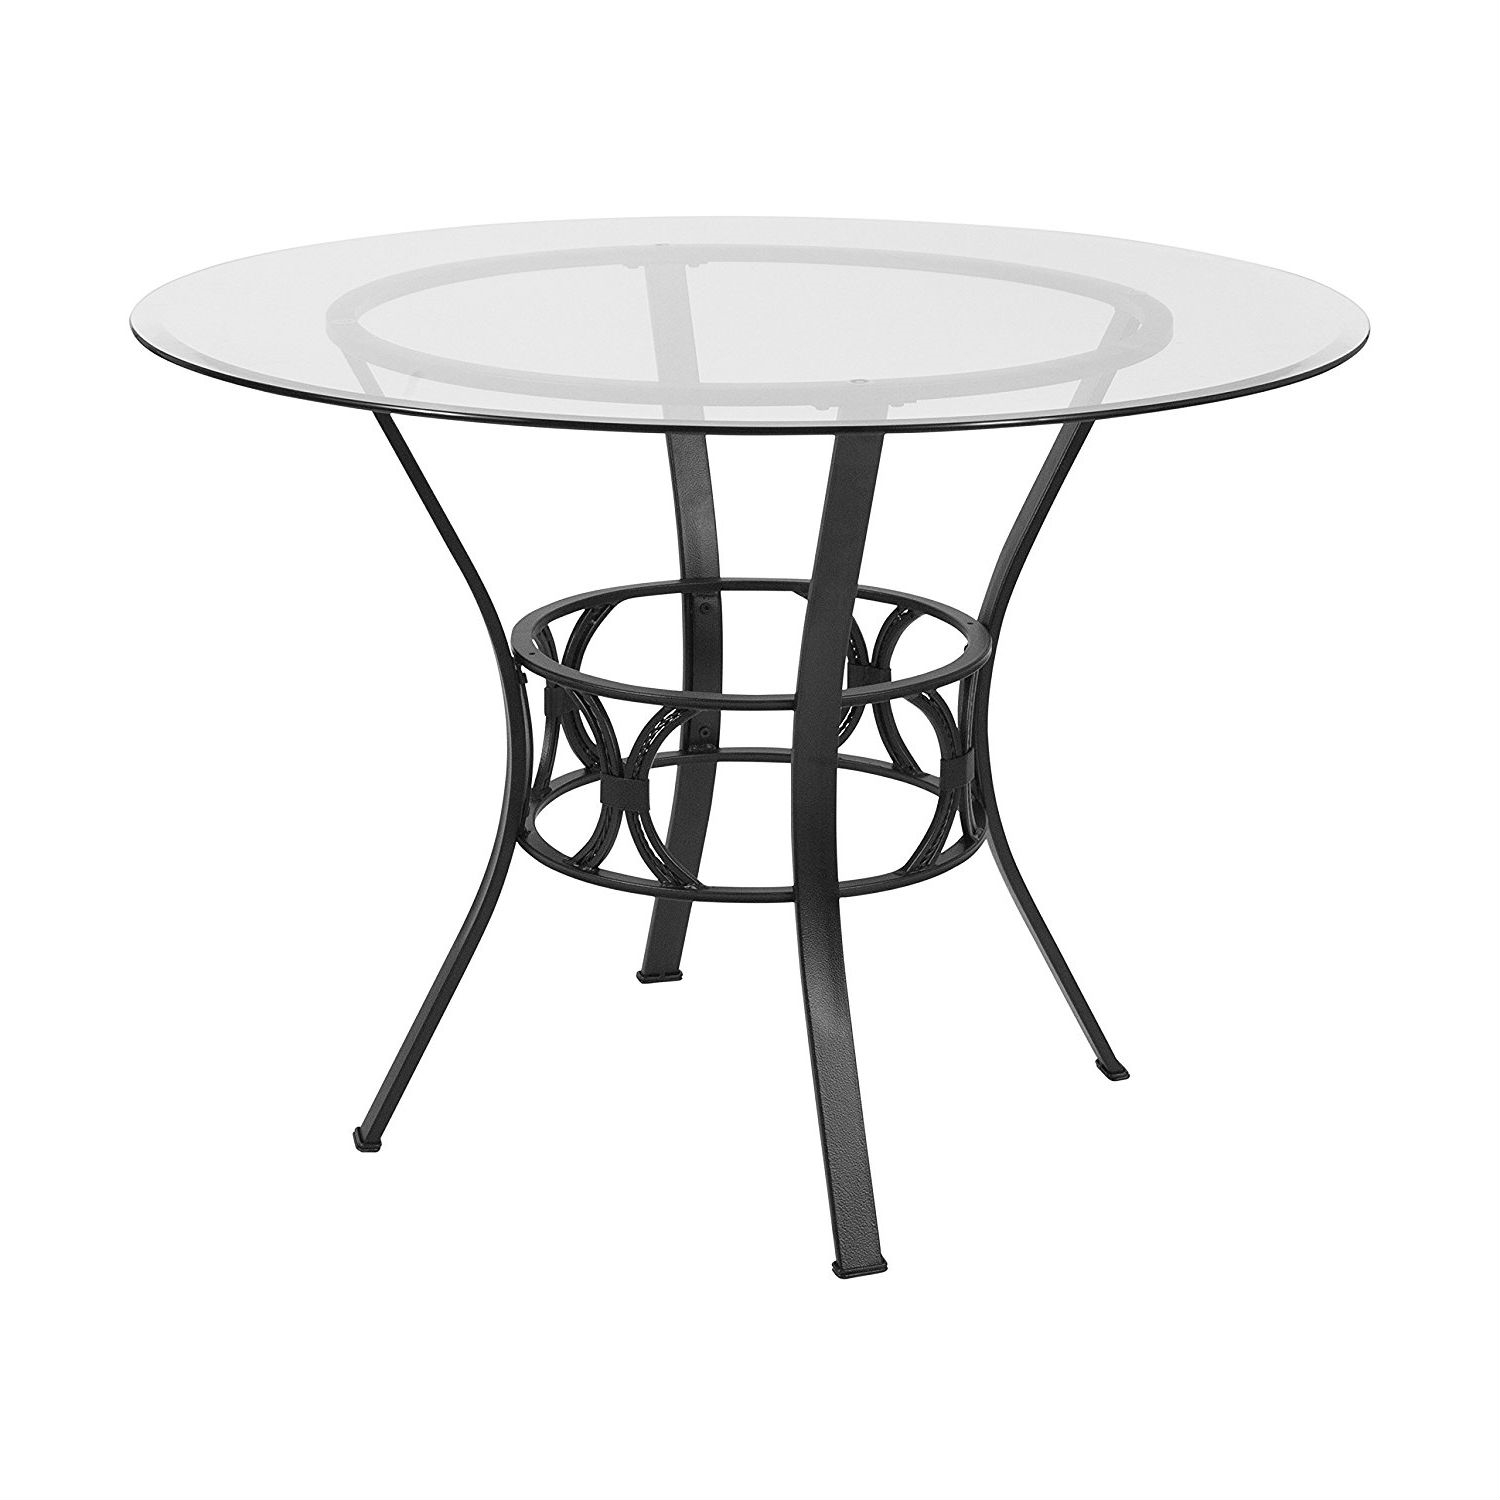 Glass Dining Table With Metal Frame, Round Table 42 Inches